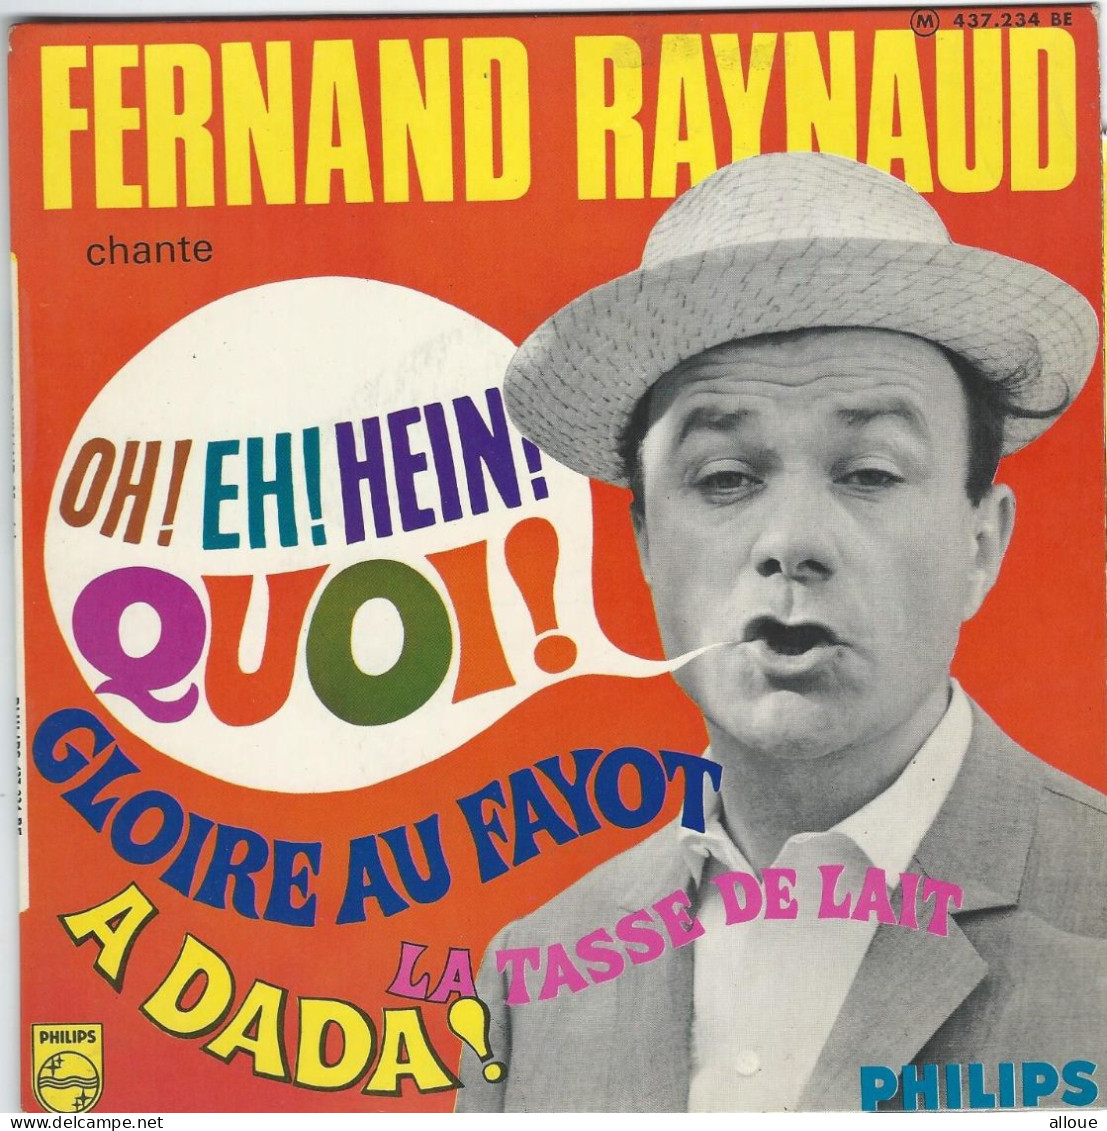 FERNAND RAYNAUD - FR EP - OH! EH! HEIN! QUOI! + 3 - Comiques, Cabaret